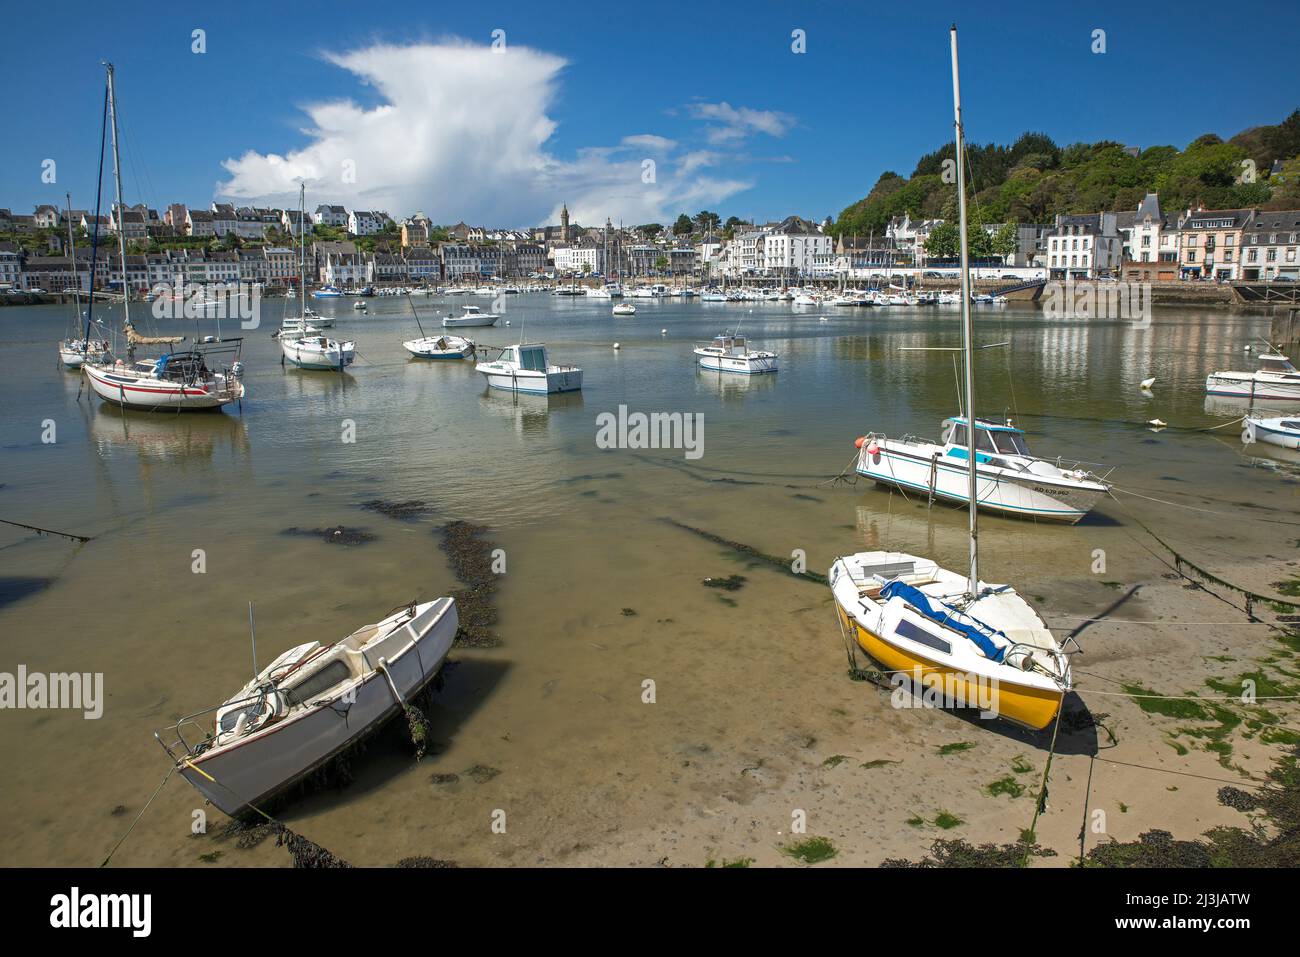 in the port of Audierne, residential and commercial buildings in the port district, France, Brittany, Finistère department Stock Photo